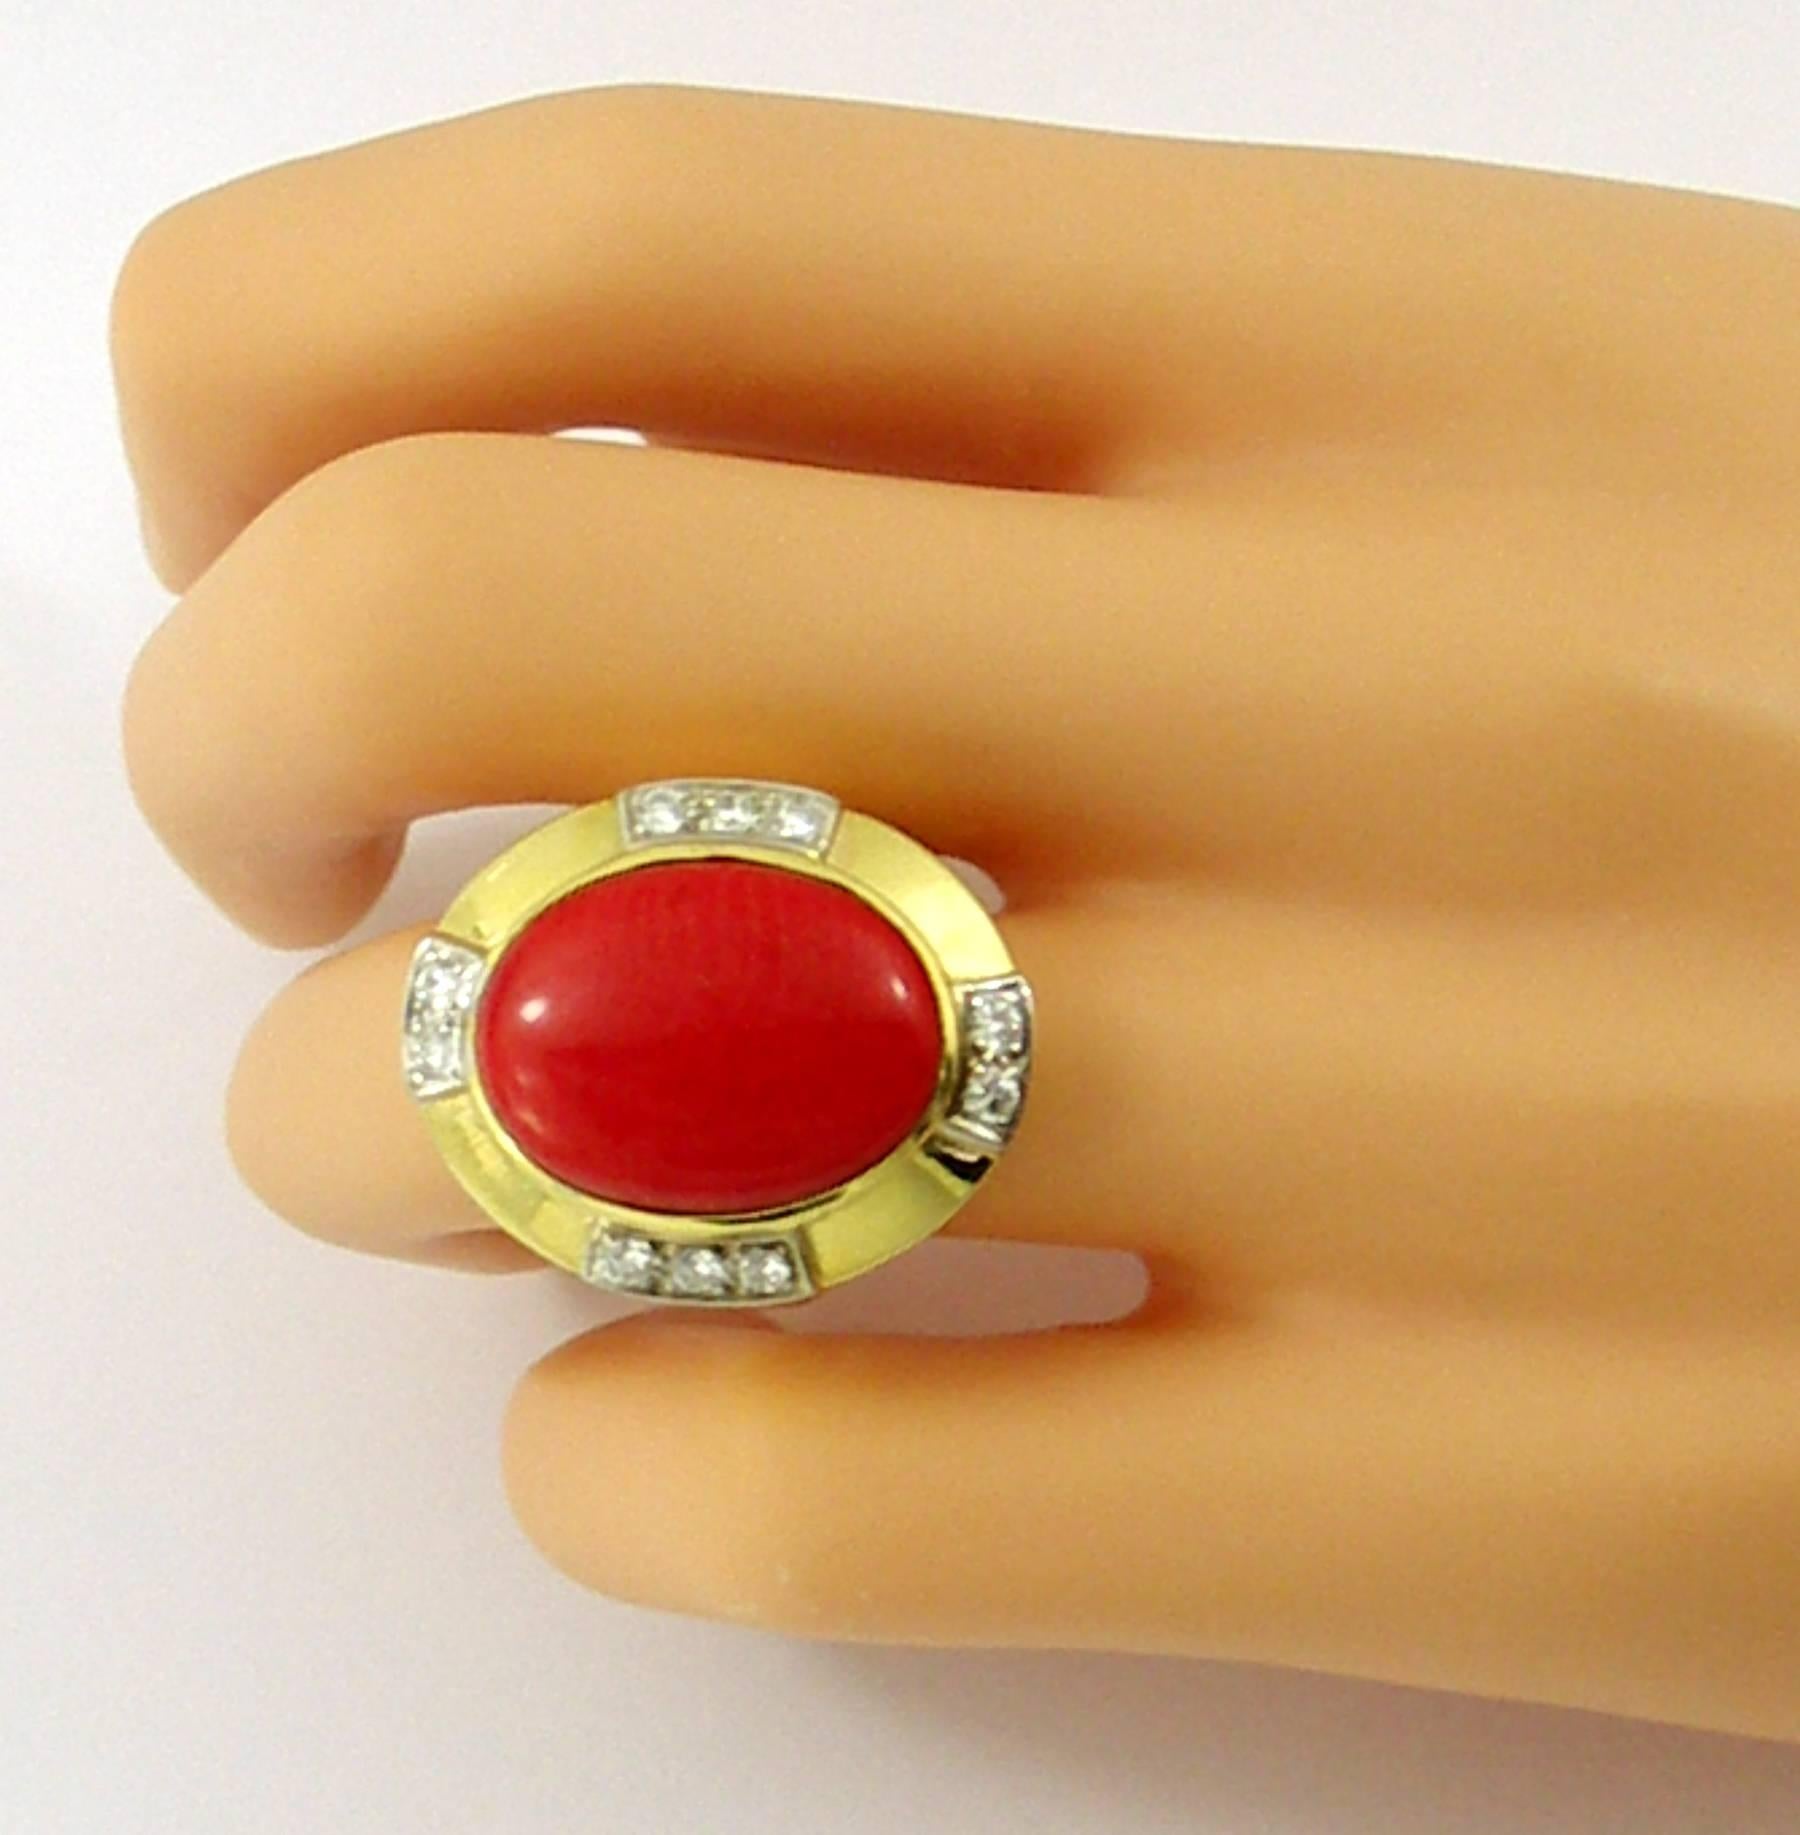 One 18K yellow gold ring signed R. Stone, and set with an oval cabochon coral measuring 20mm X 15mm. It is also set with 10 Round brilliant cut diamonds with a total weight of approximately 0.65ct of overall G color and VVS2/VS1 clarity.
Ring Size 8